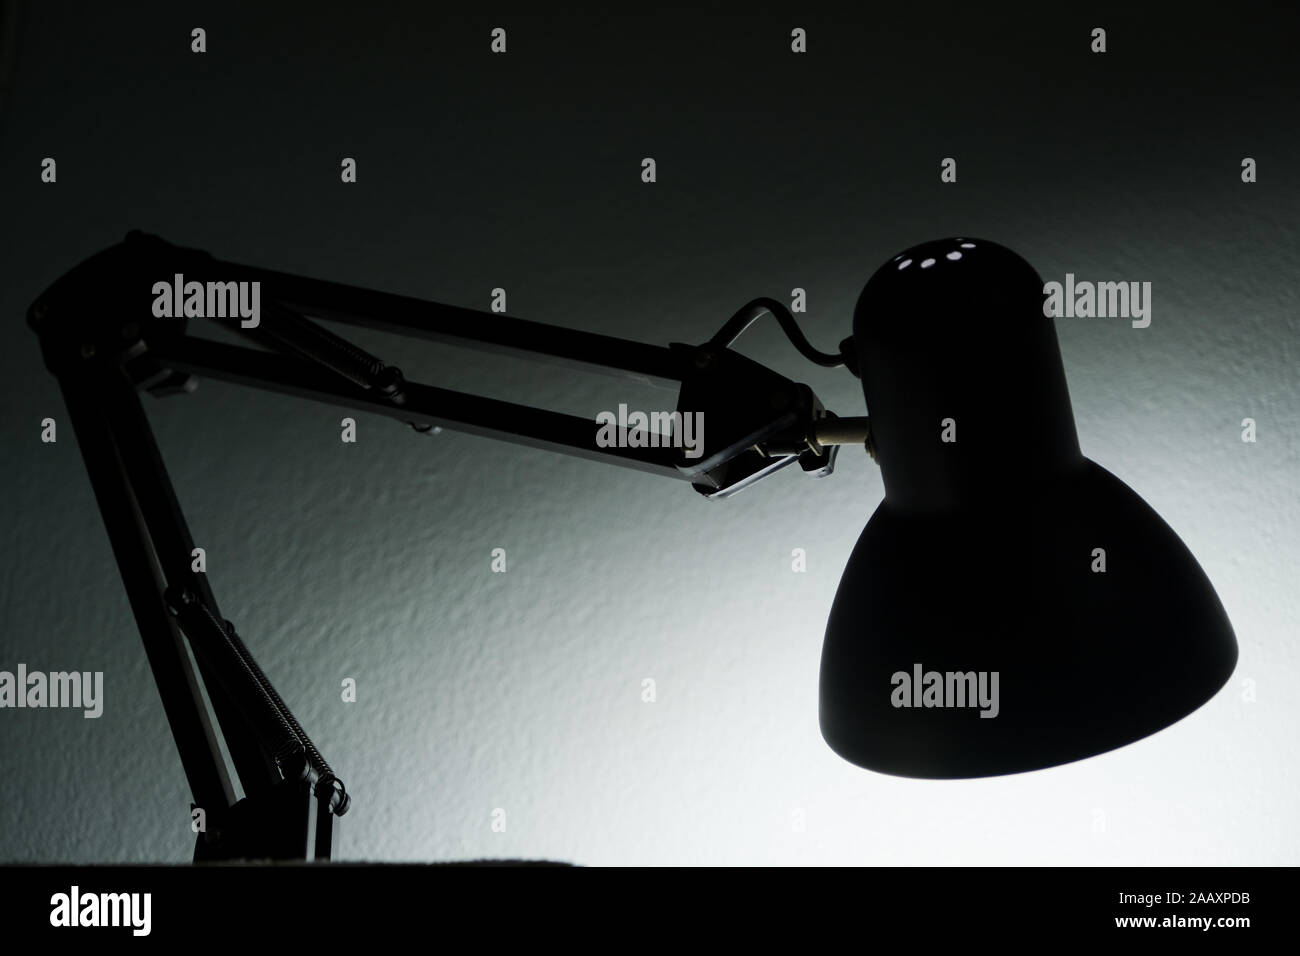 https://c8.alamy.com/comp/2AAXPDB/the-silhouette-of-a-table-lamp-on-the-background-of-a-window-in-the-morning-at-dawn-work-until-morning-work-at-night-2AAXPDB.jpg